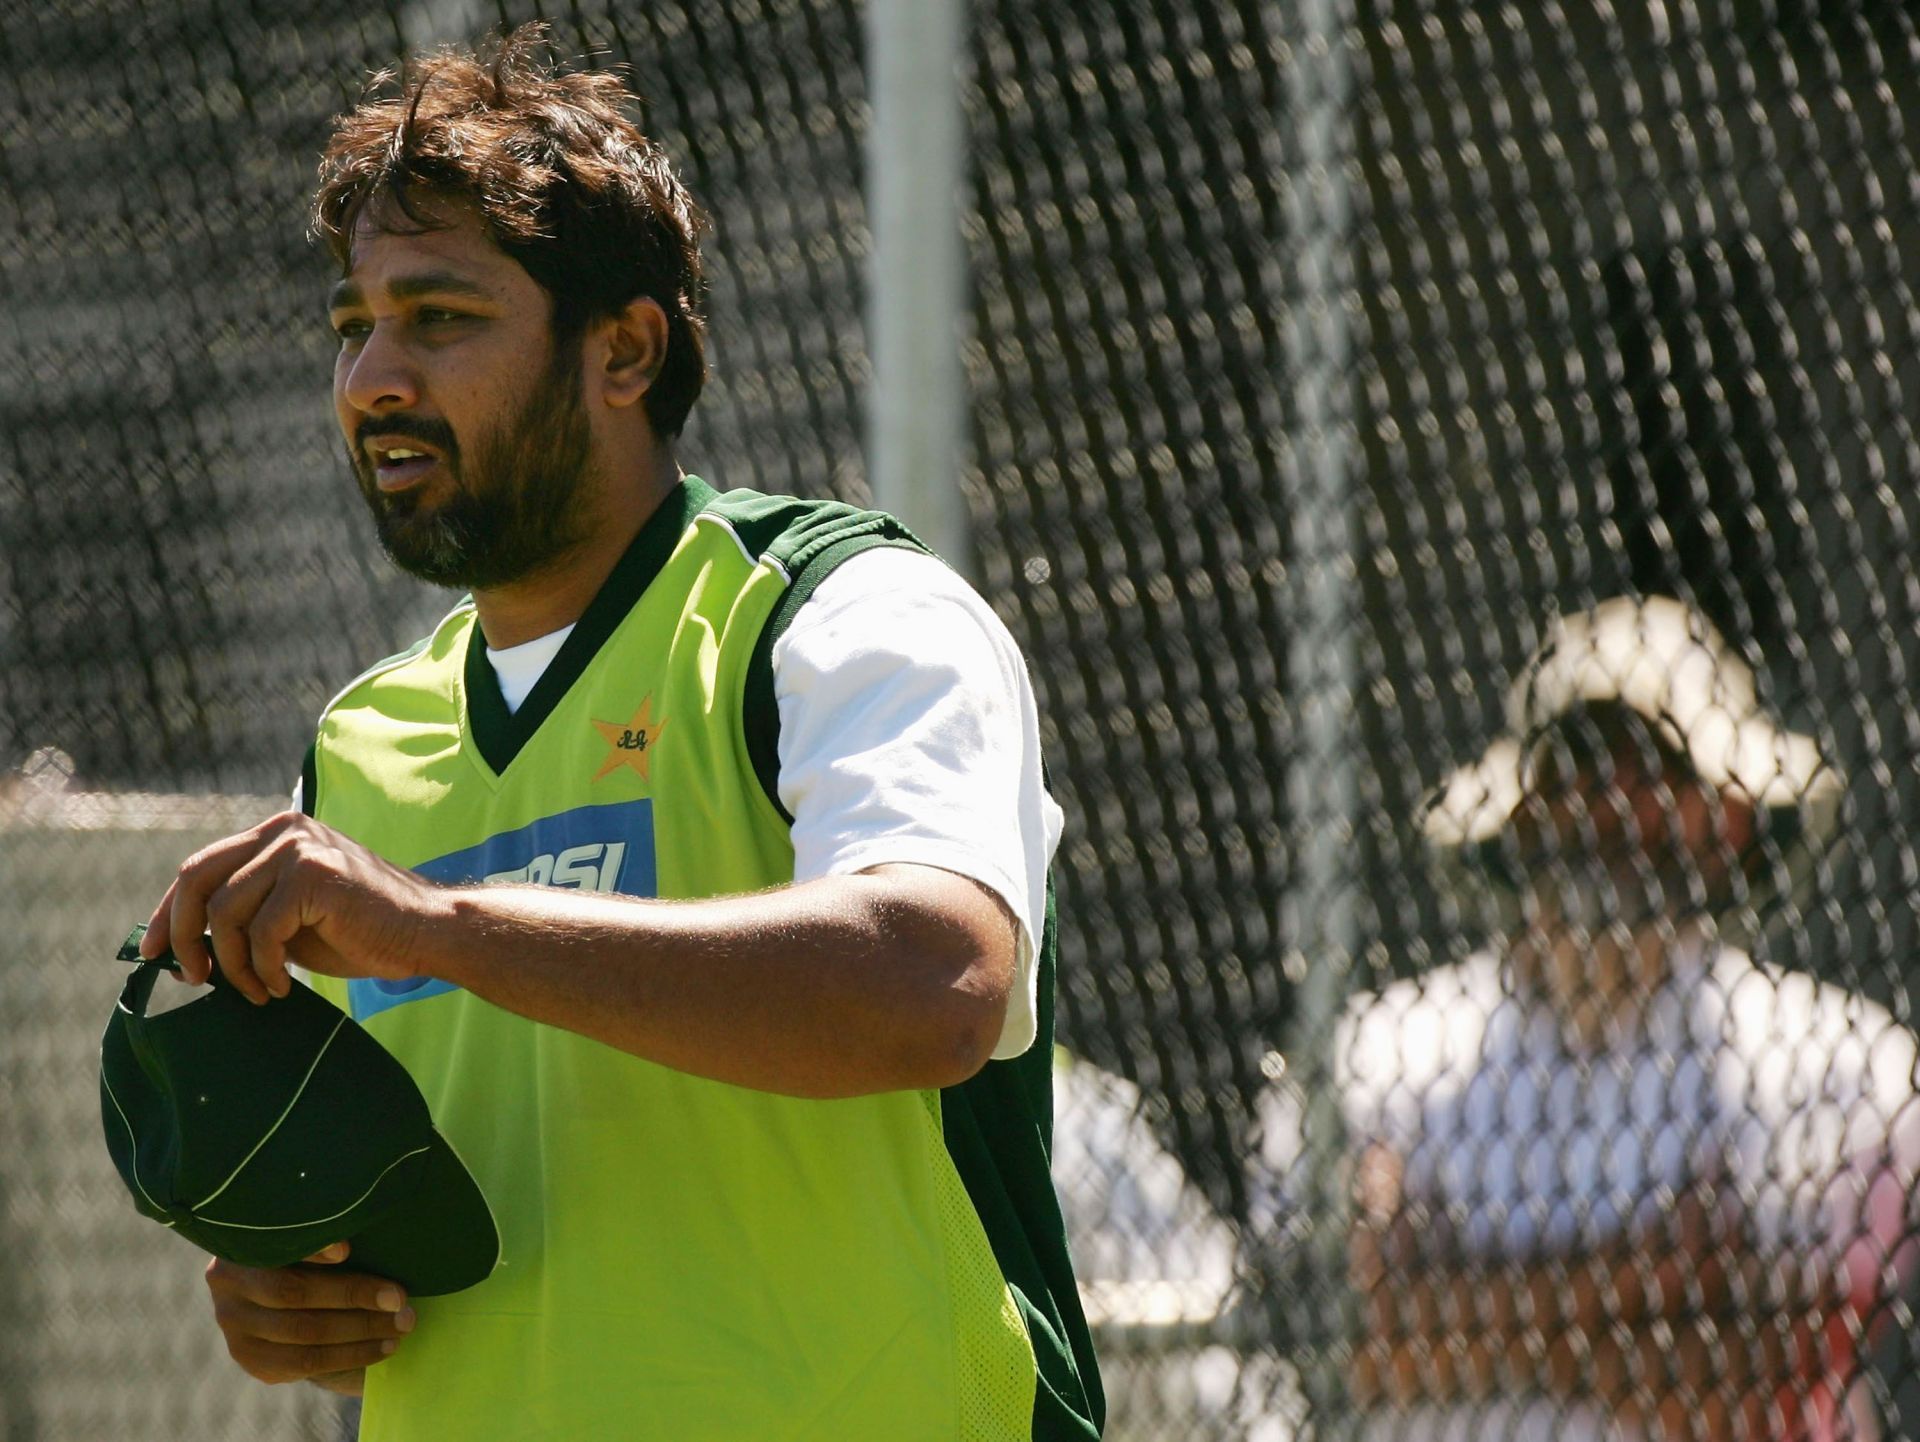 Inzamam-ul-Haq was one of the stars of the semifinal and final of the 1992 World Cup (File image).